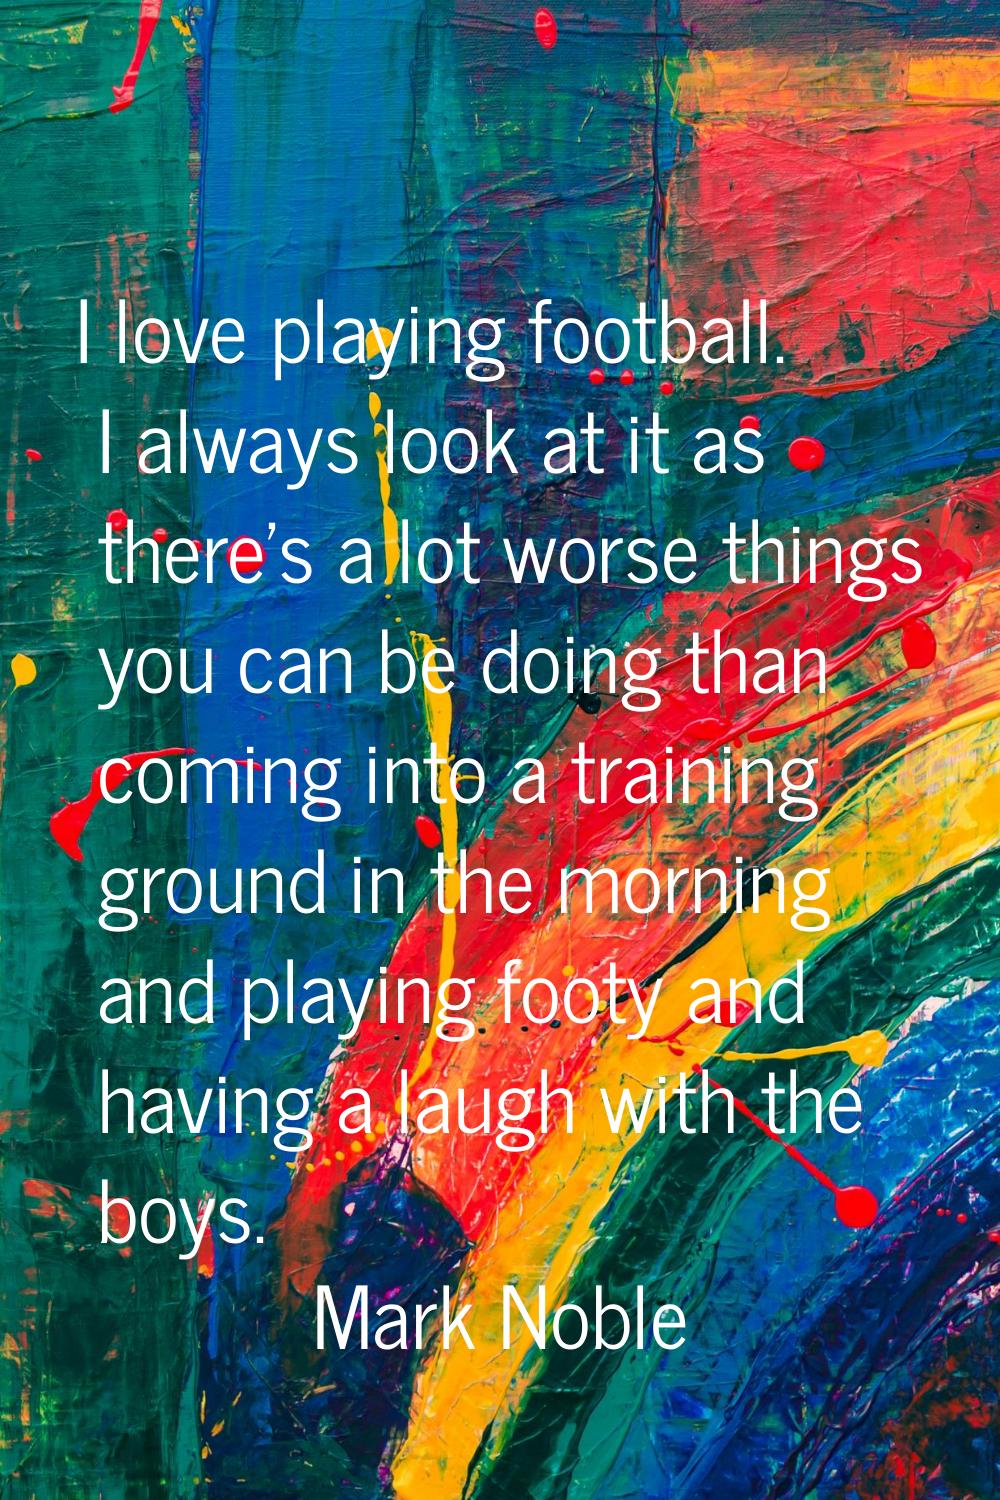 I love playing football. I always look at it as there's a lot worse things you can be doing than co